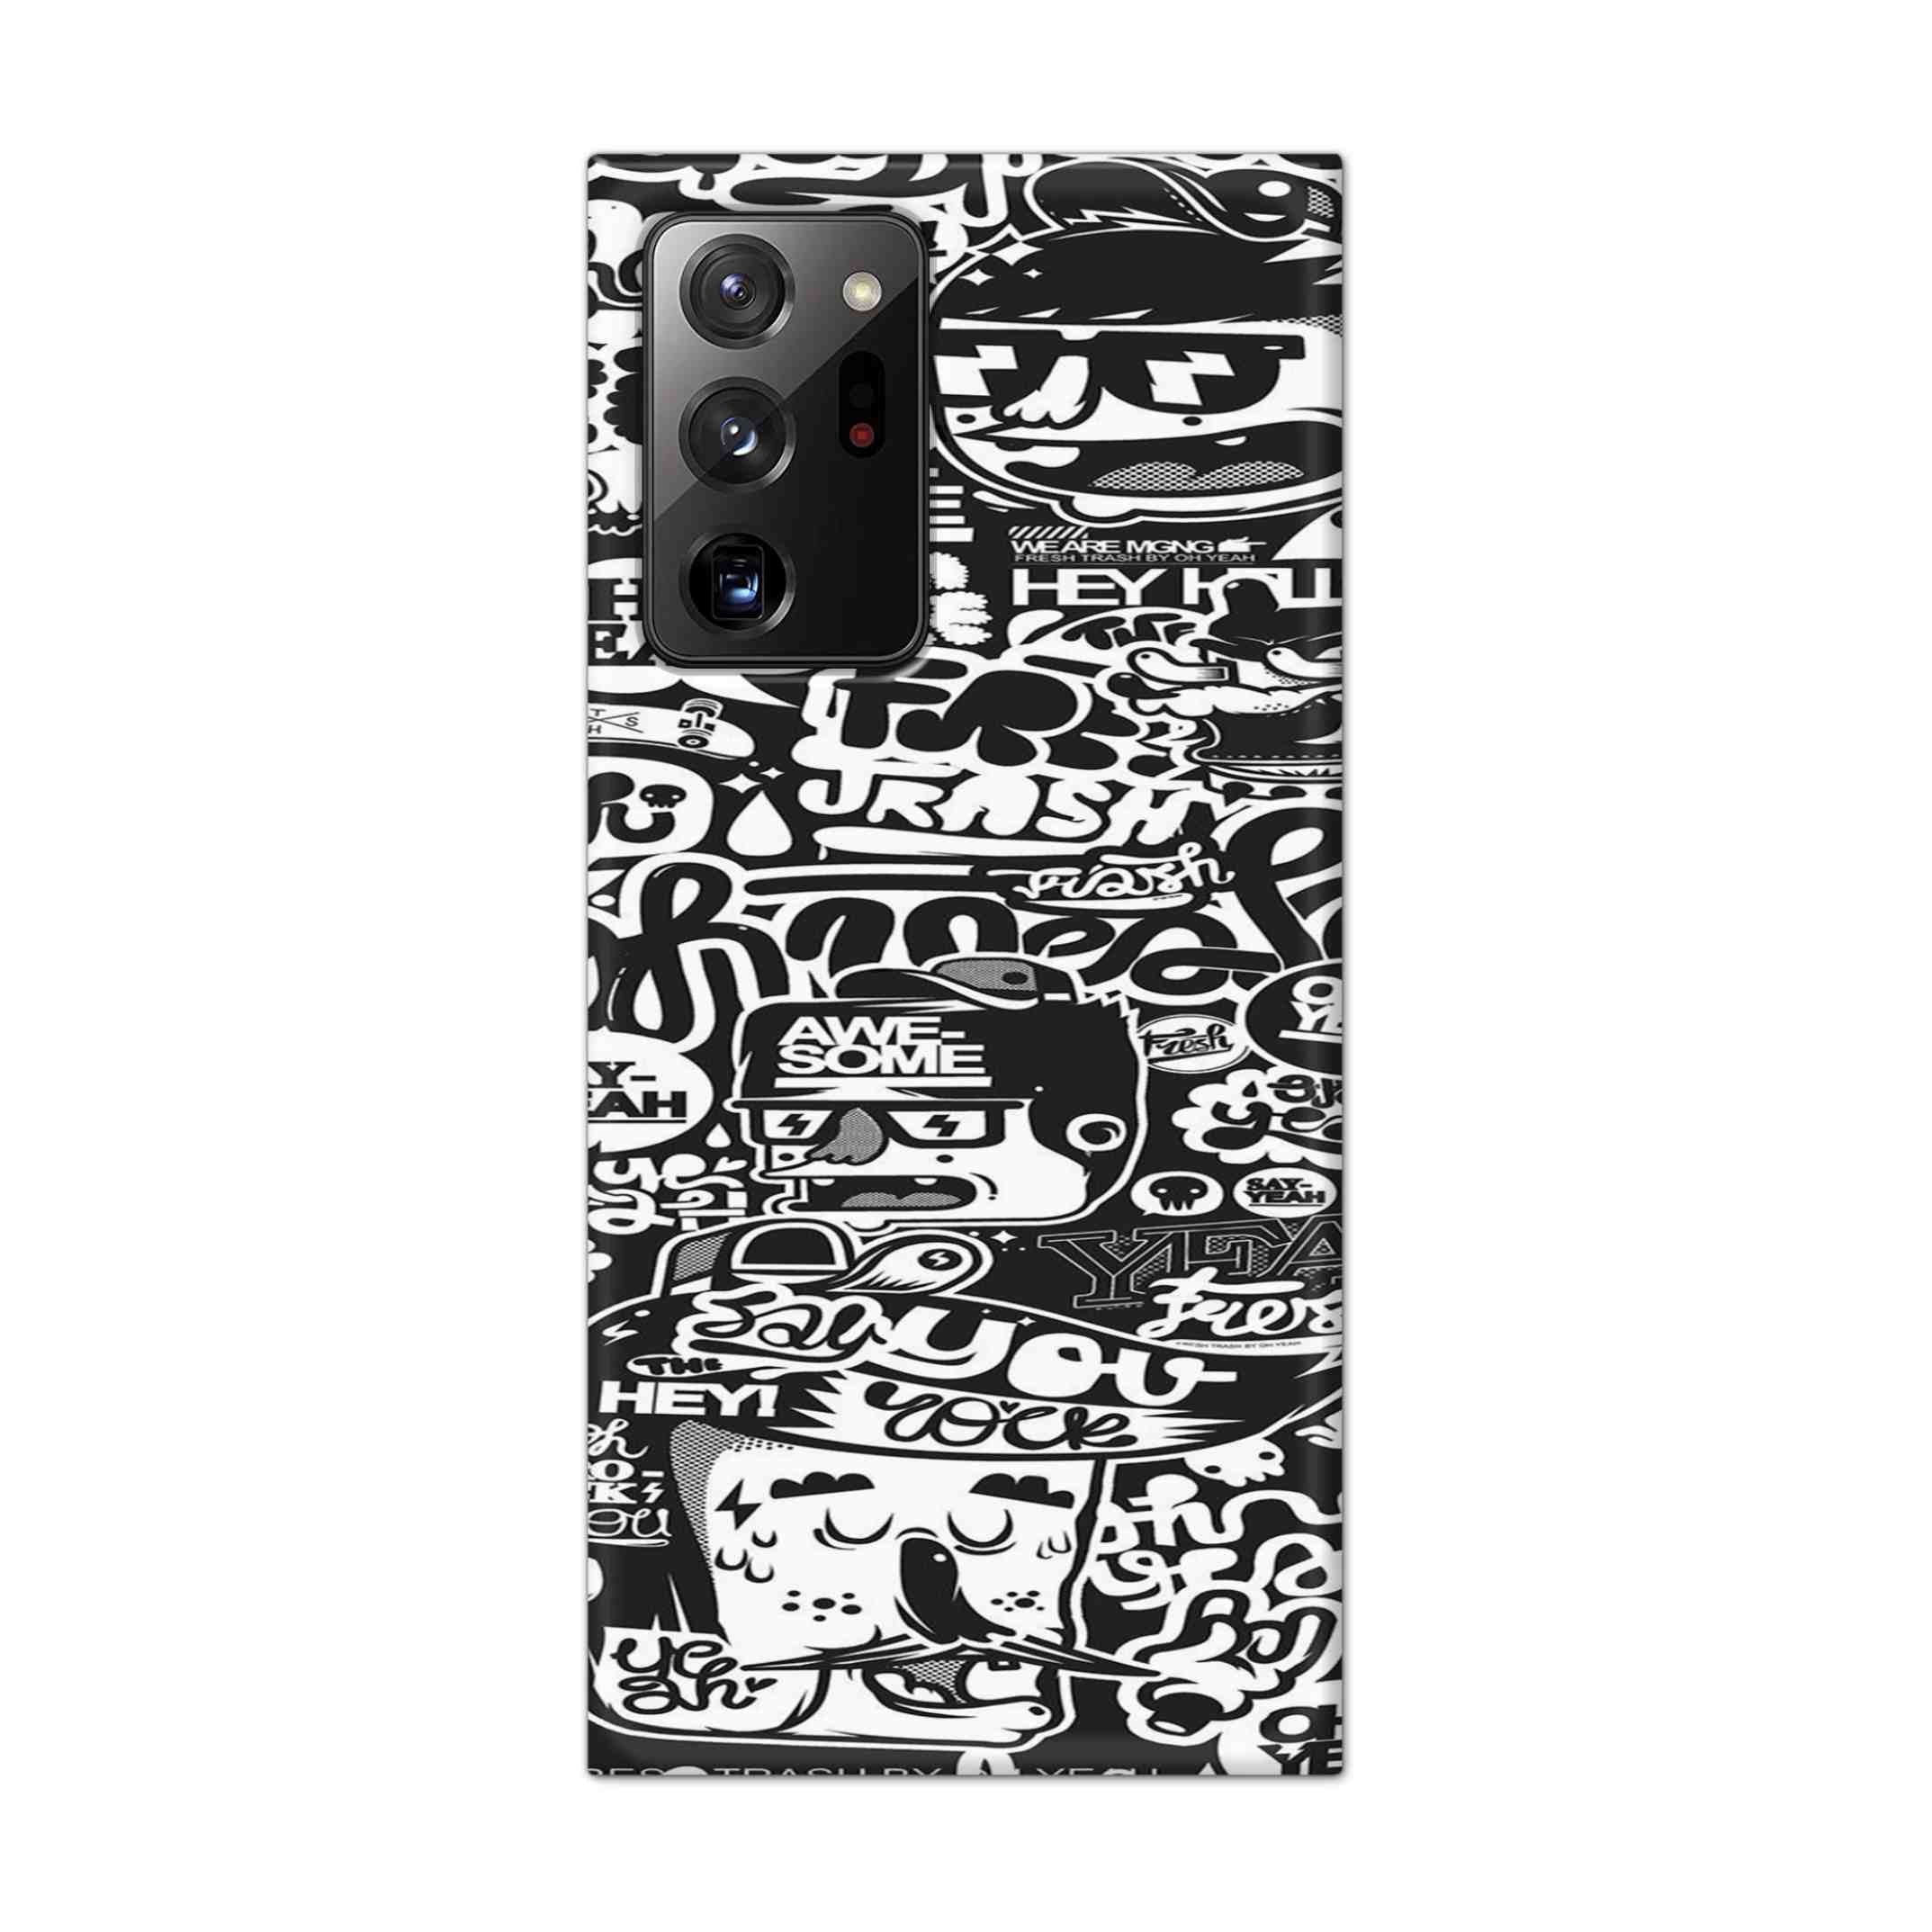 Buy Awesome Hard Back Mobile Phone Case Cover For Samsung Galaxy Note 20 Ultra Online